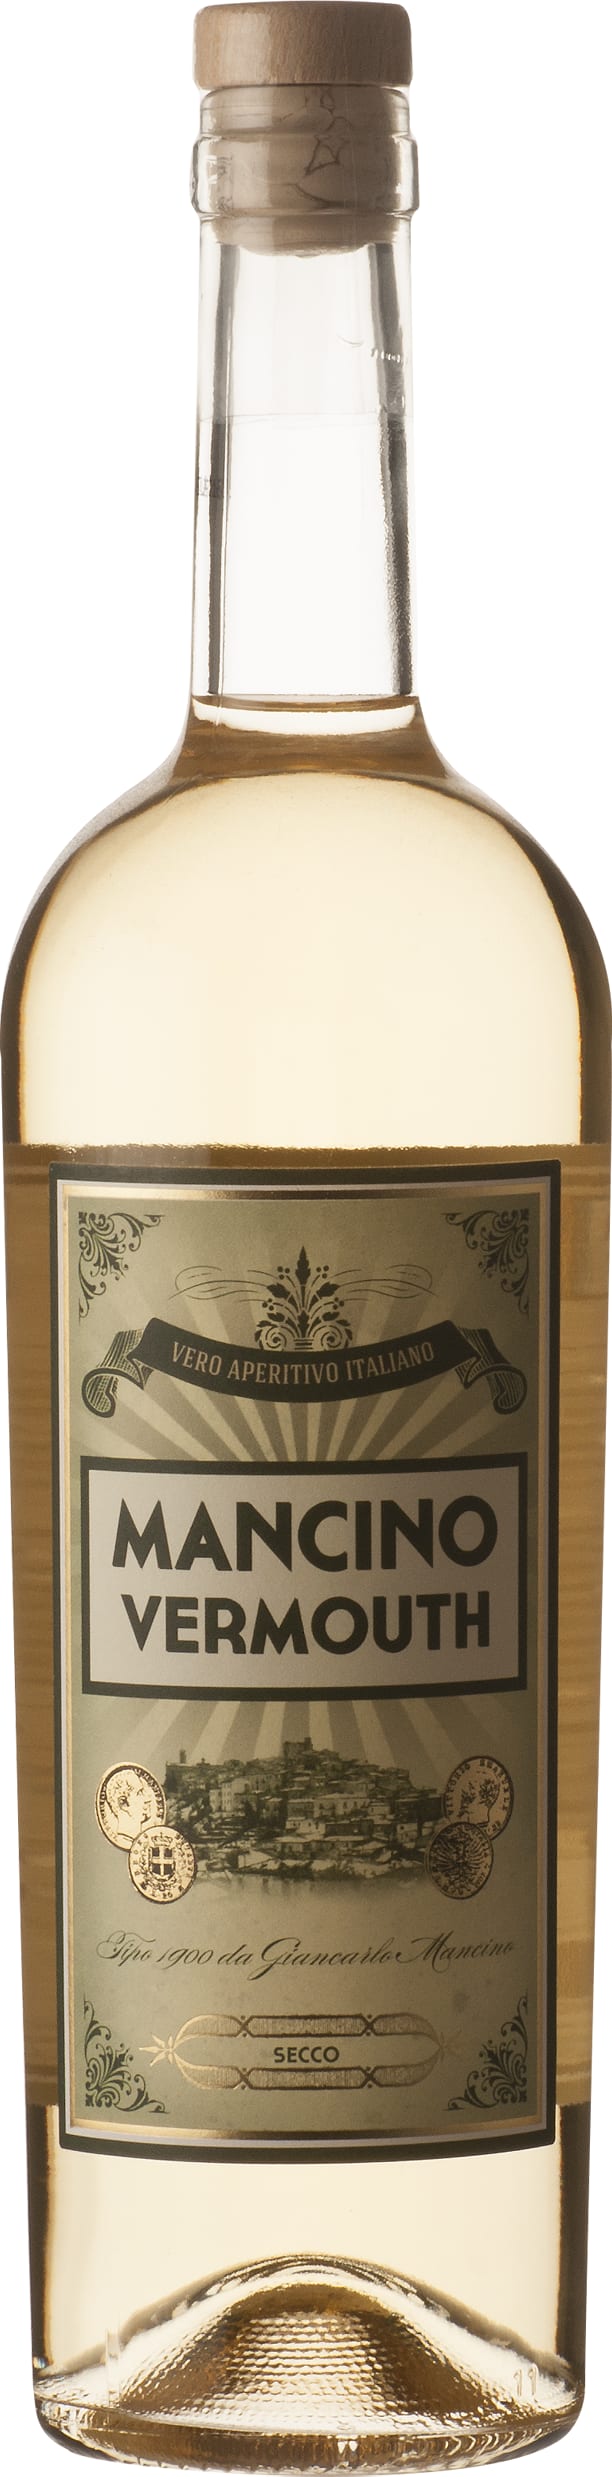 Mancino Secco Vermouth 75cl NV - Buy Mancino Vermouths Wines from GREAT WINES DIRECT wine shop